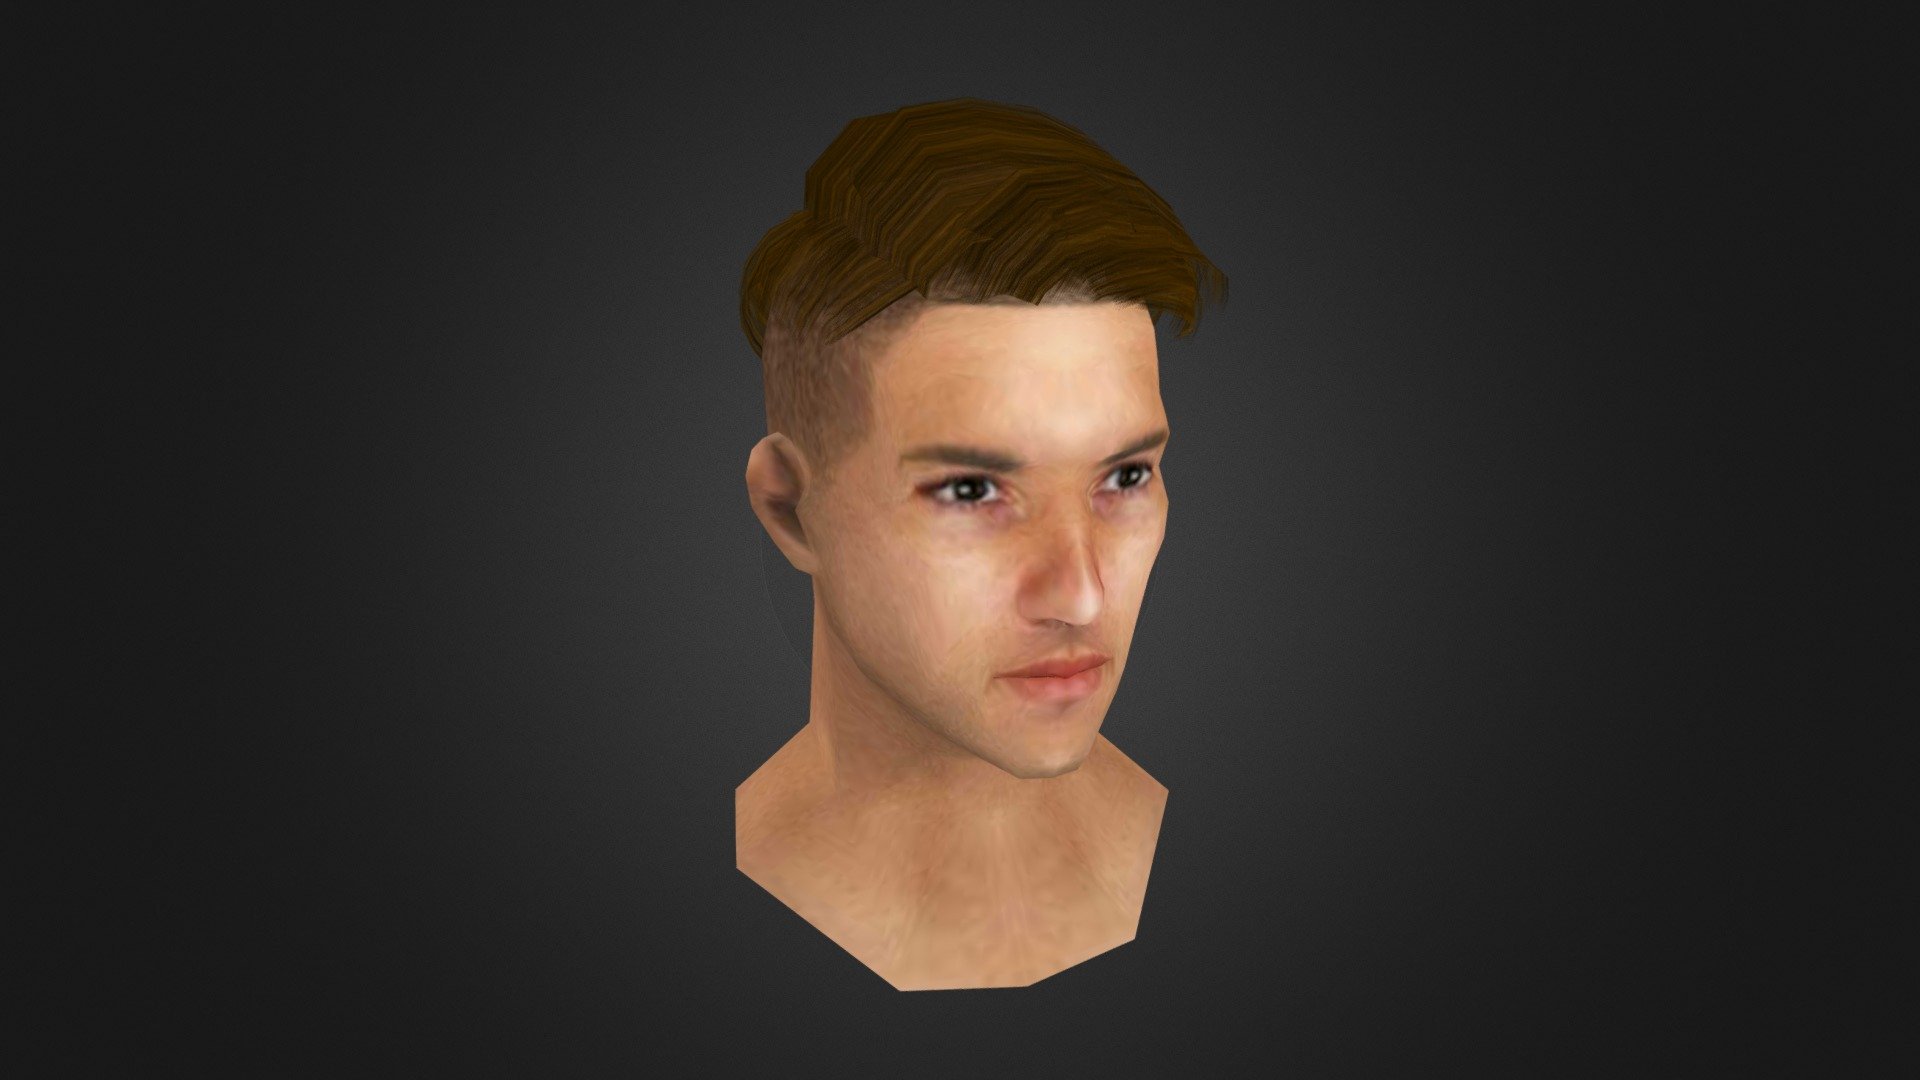 Low poly Side Part Hairstyle training.
1500 tris hair only.
Hair cards placed manually 3d model